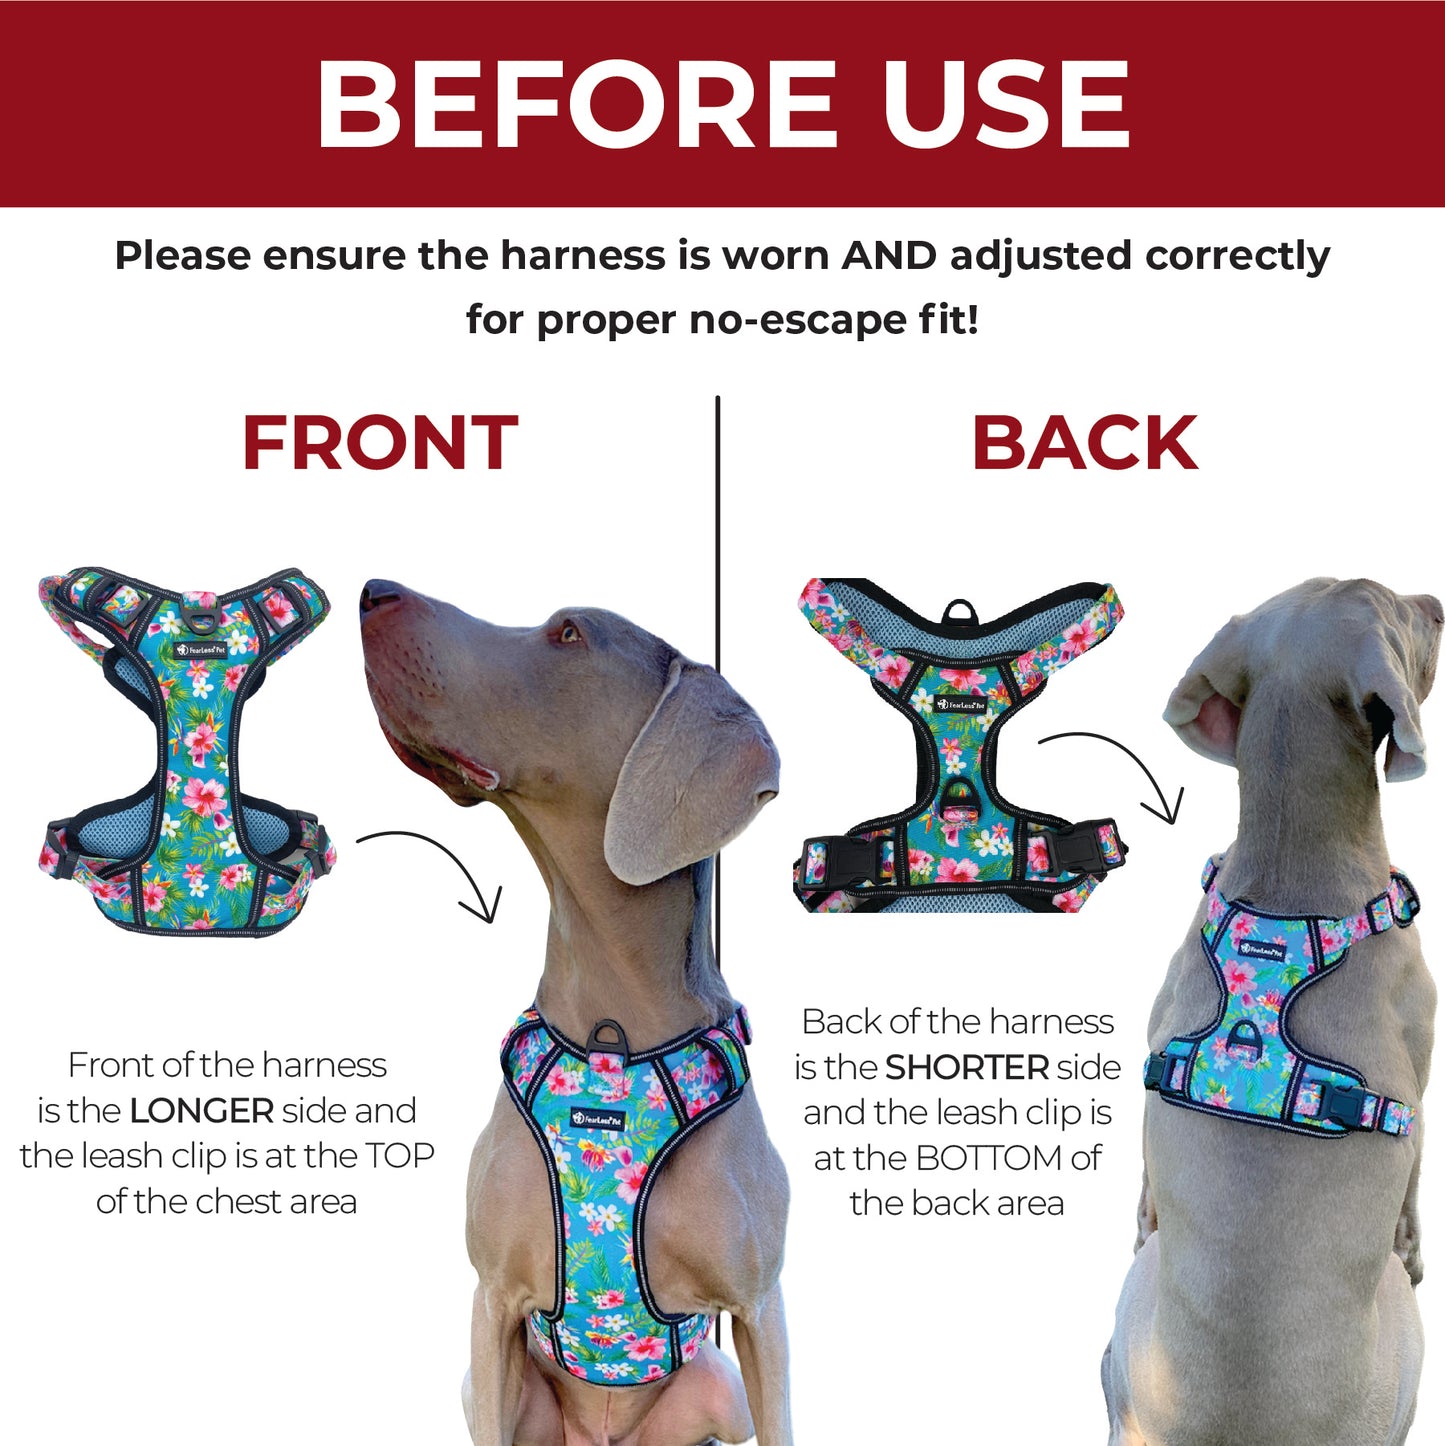 an infographic of a no escape dog harness showing how to wear the harness front vs back on a Weimaraner dog